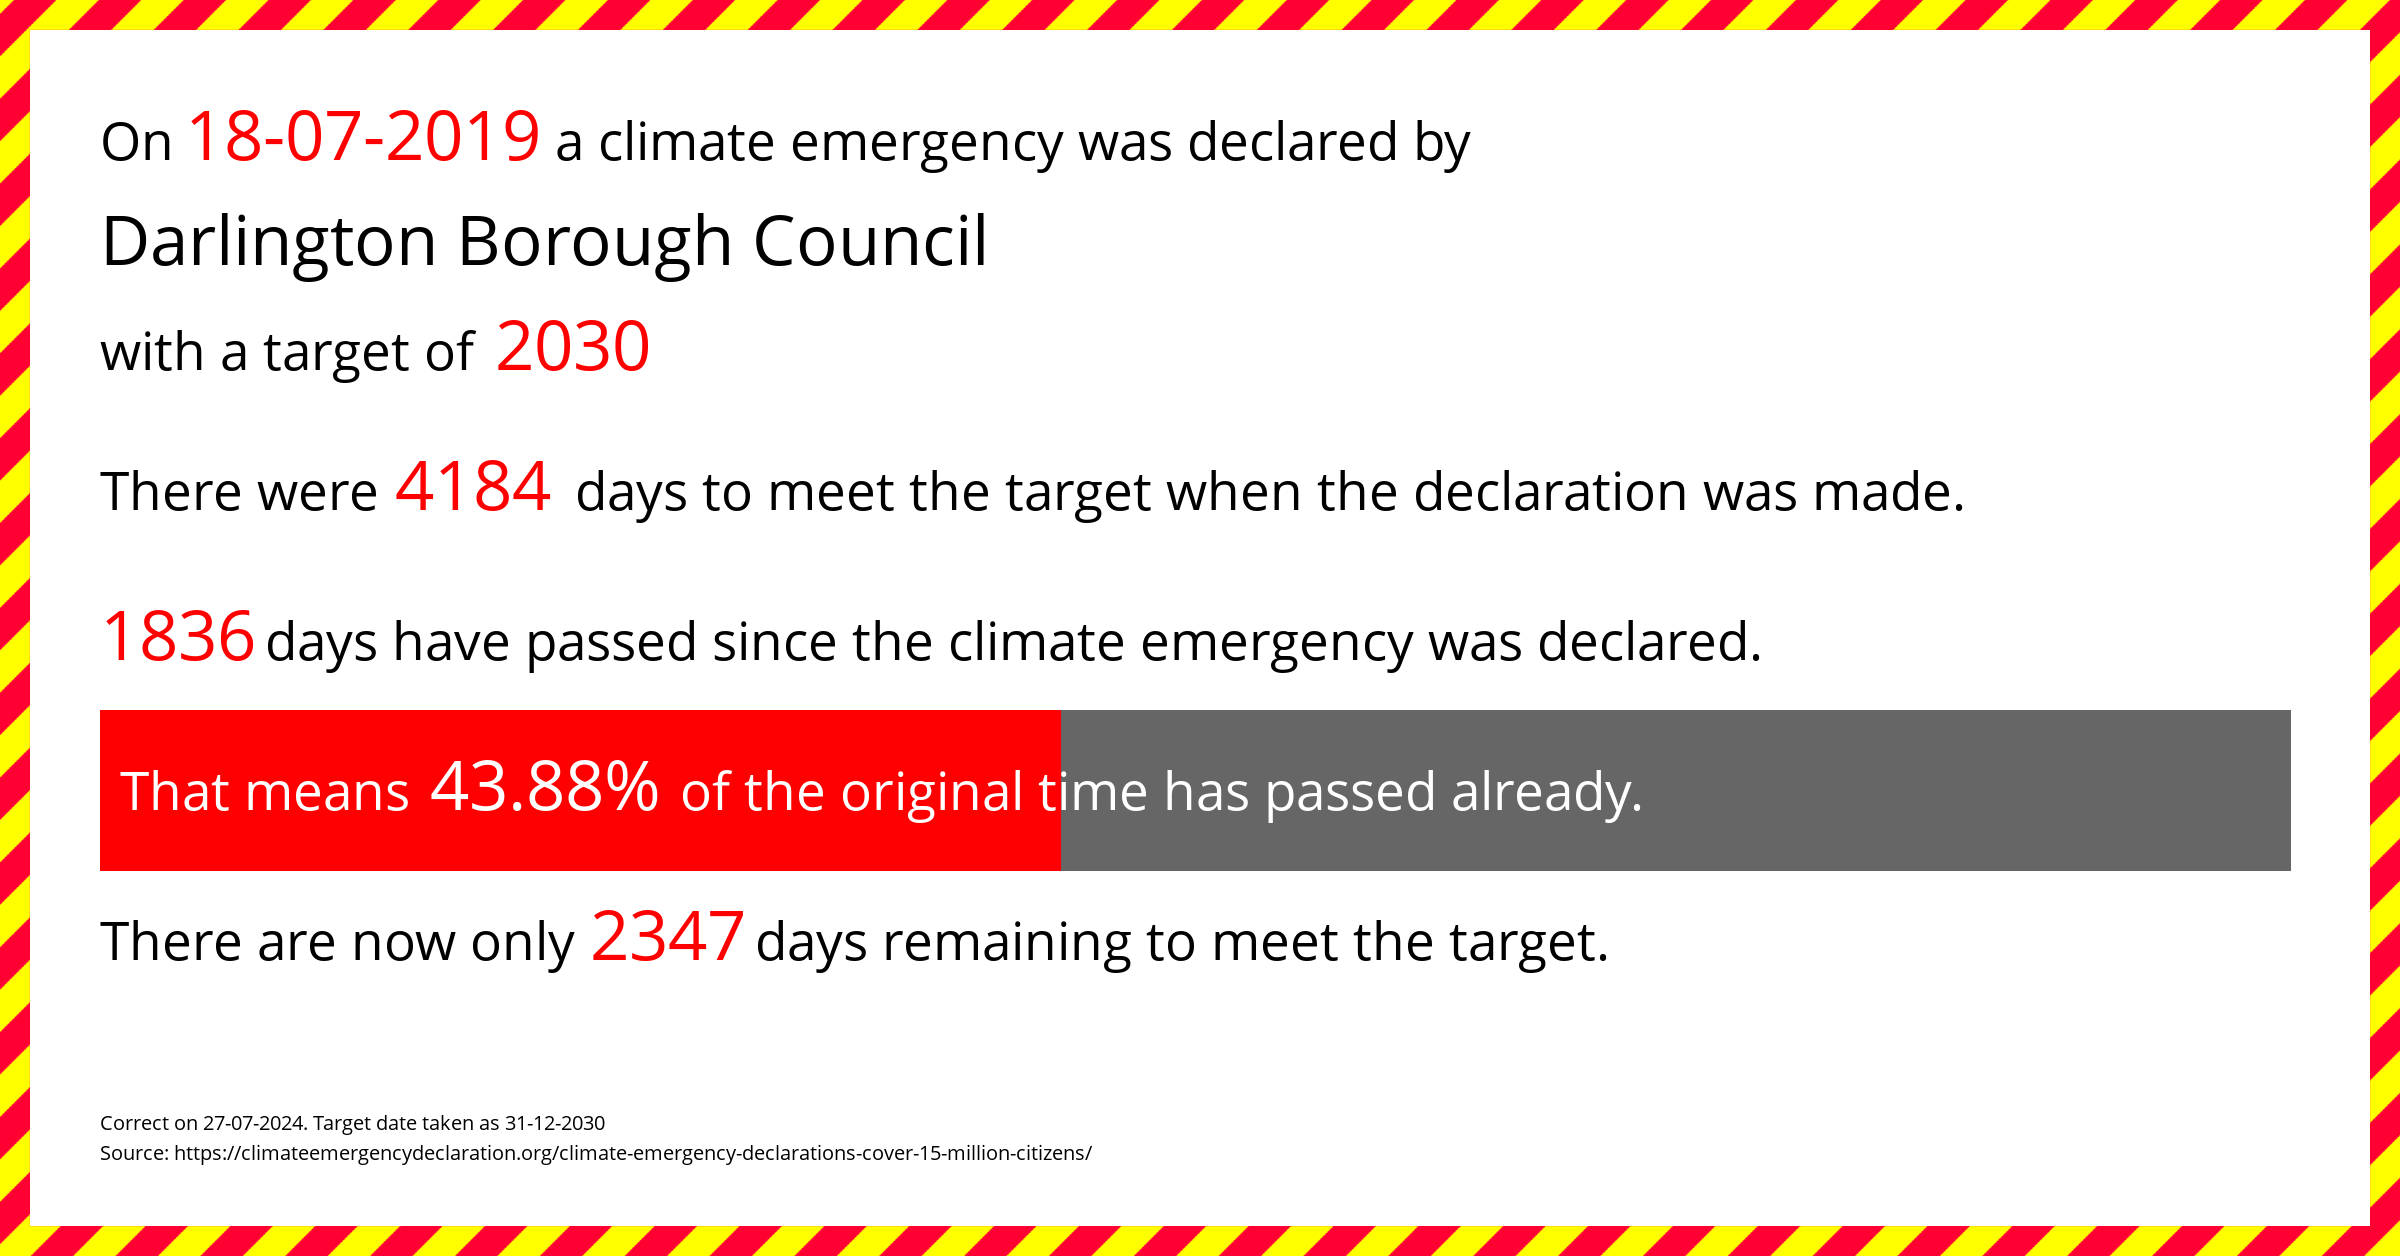 Darlington Borough Council declared a Climate emergency on Thursday 18th July 2019, with a target of 2030.